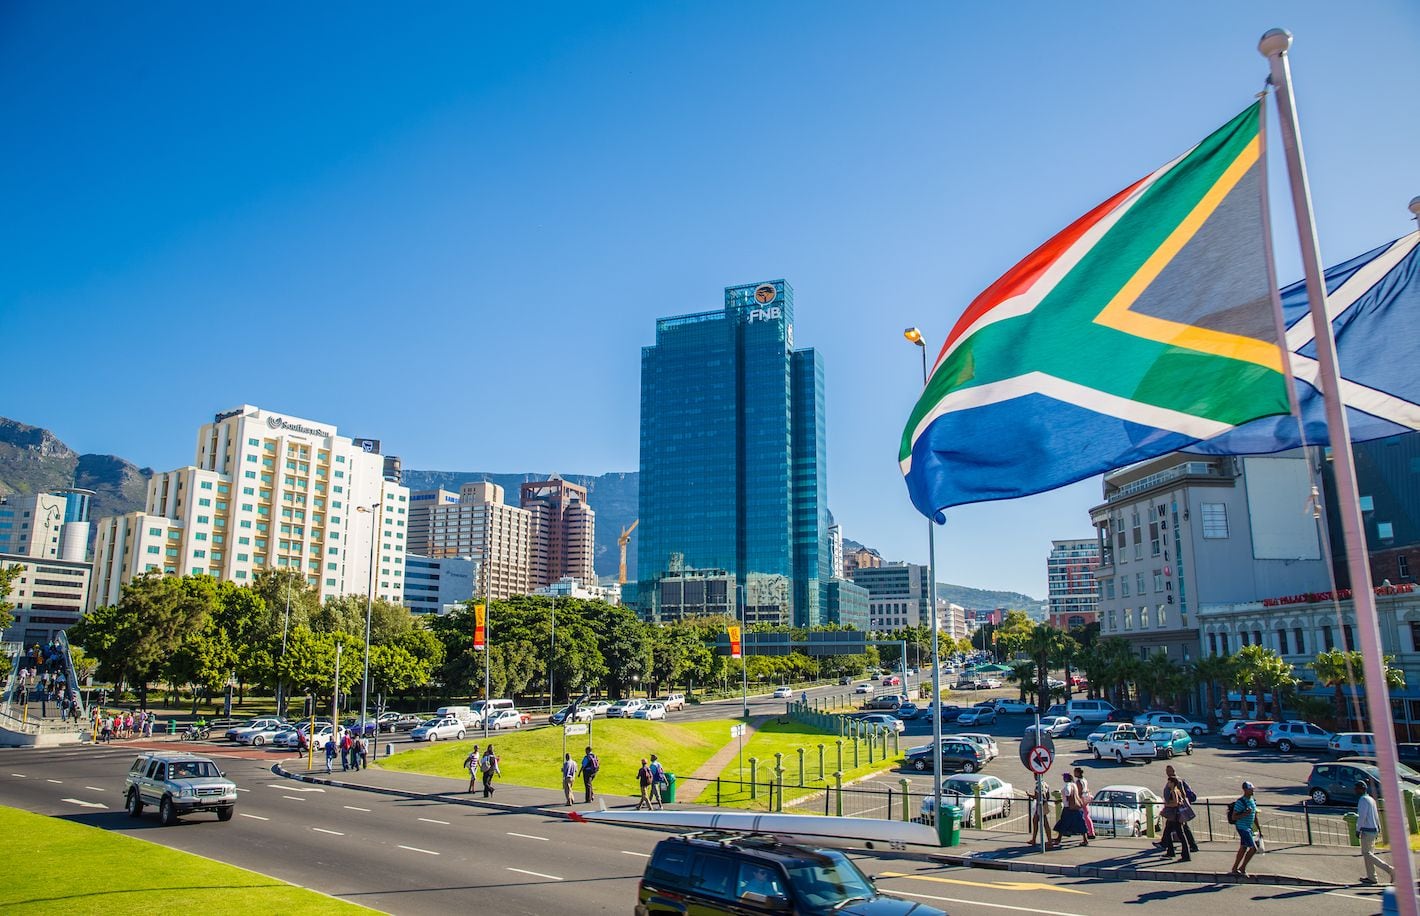 South African Regulator Issues Warning on FTX, Bybit